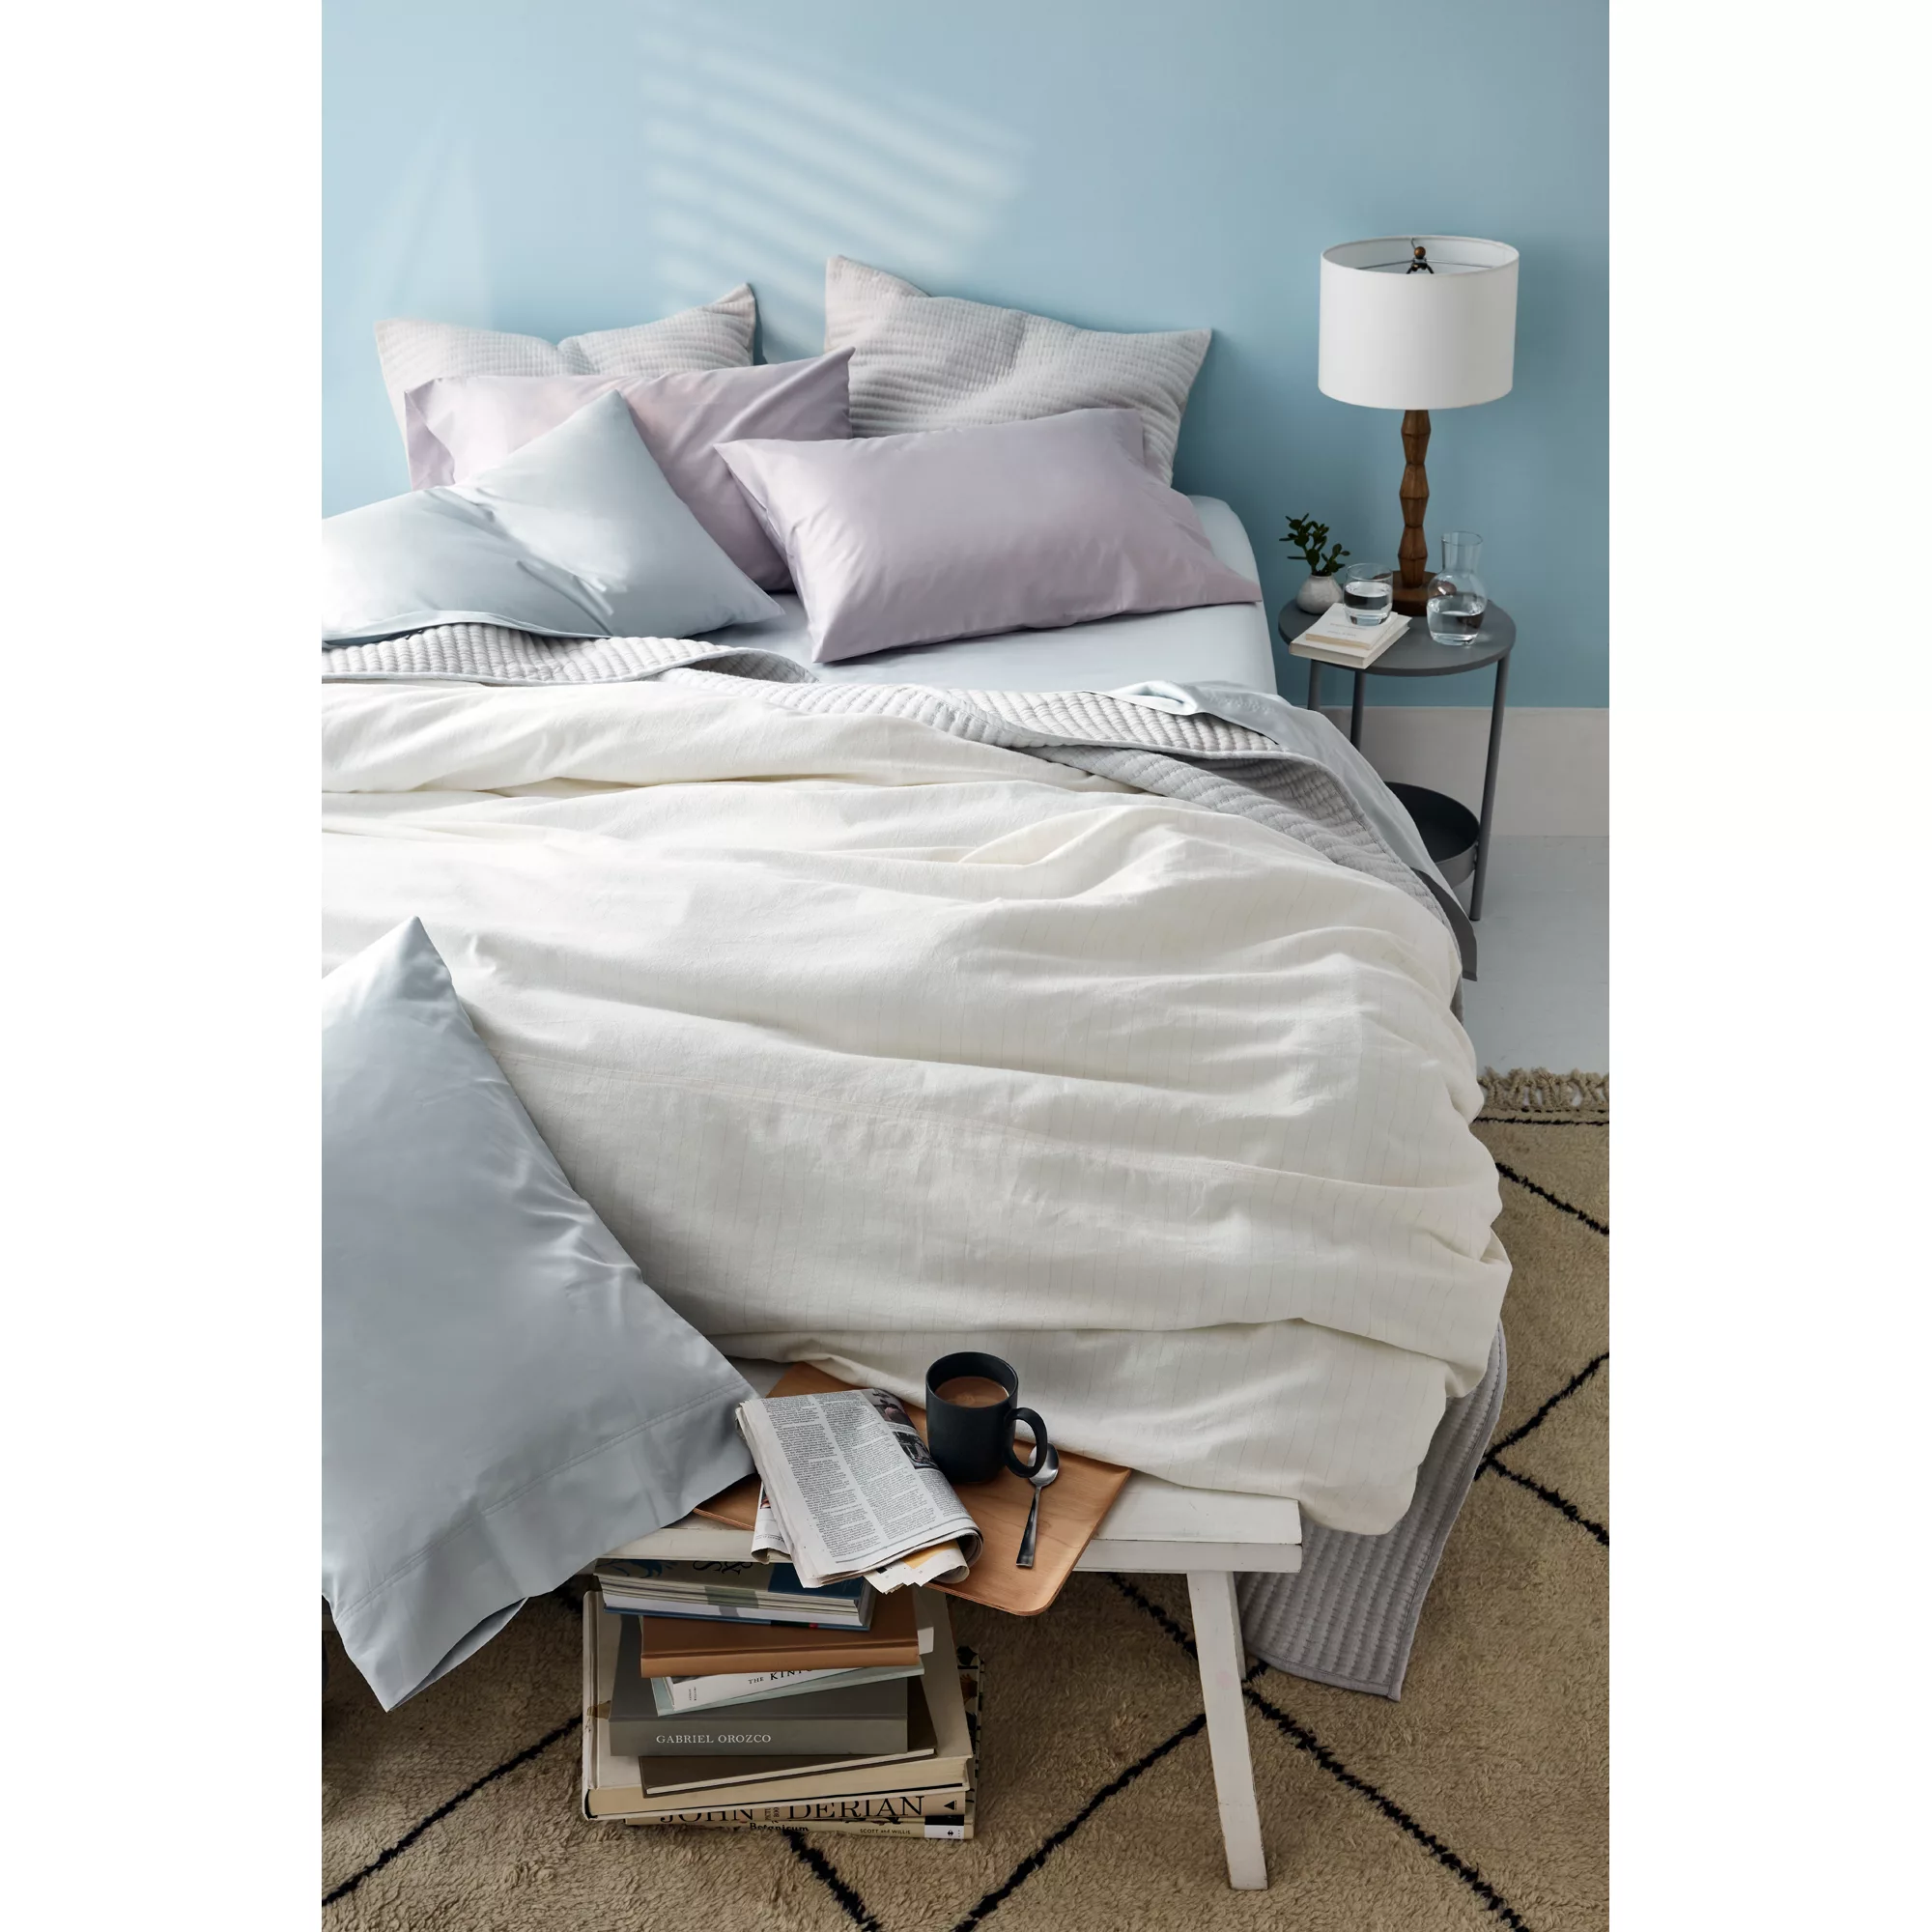 Nestwell™ Washed Linen Cotton 3-Piece King Comforter Set in White